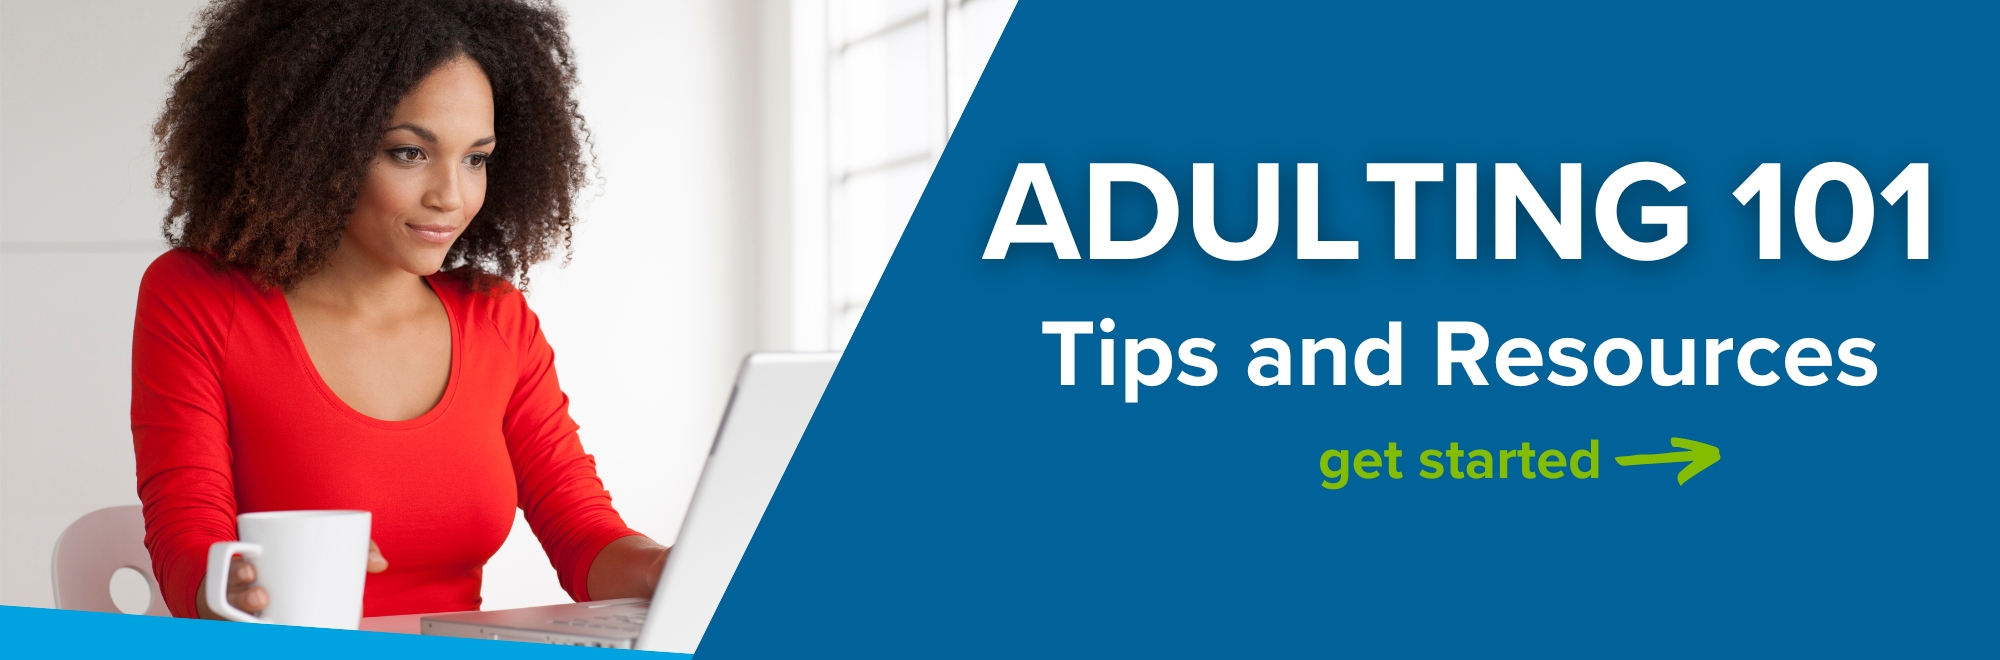 Adulting 101: Find tips and resources to conquer your finances.